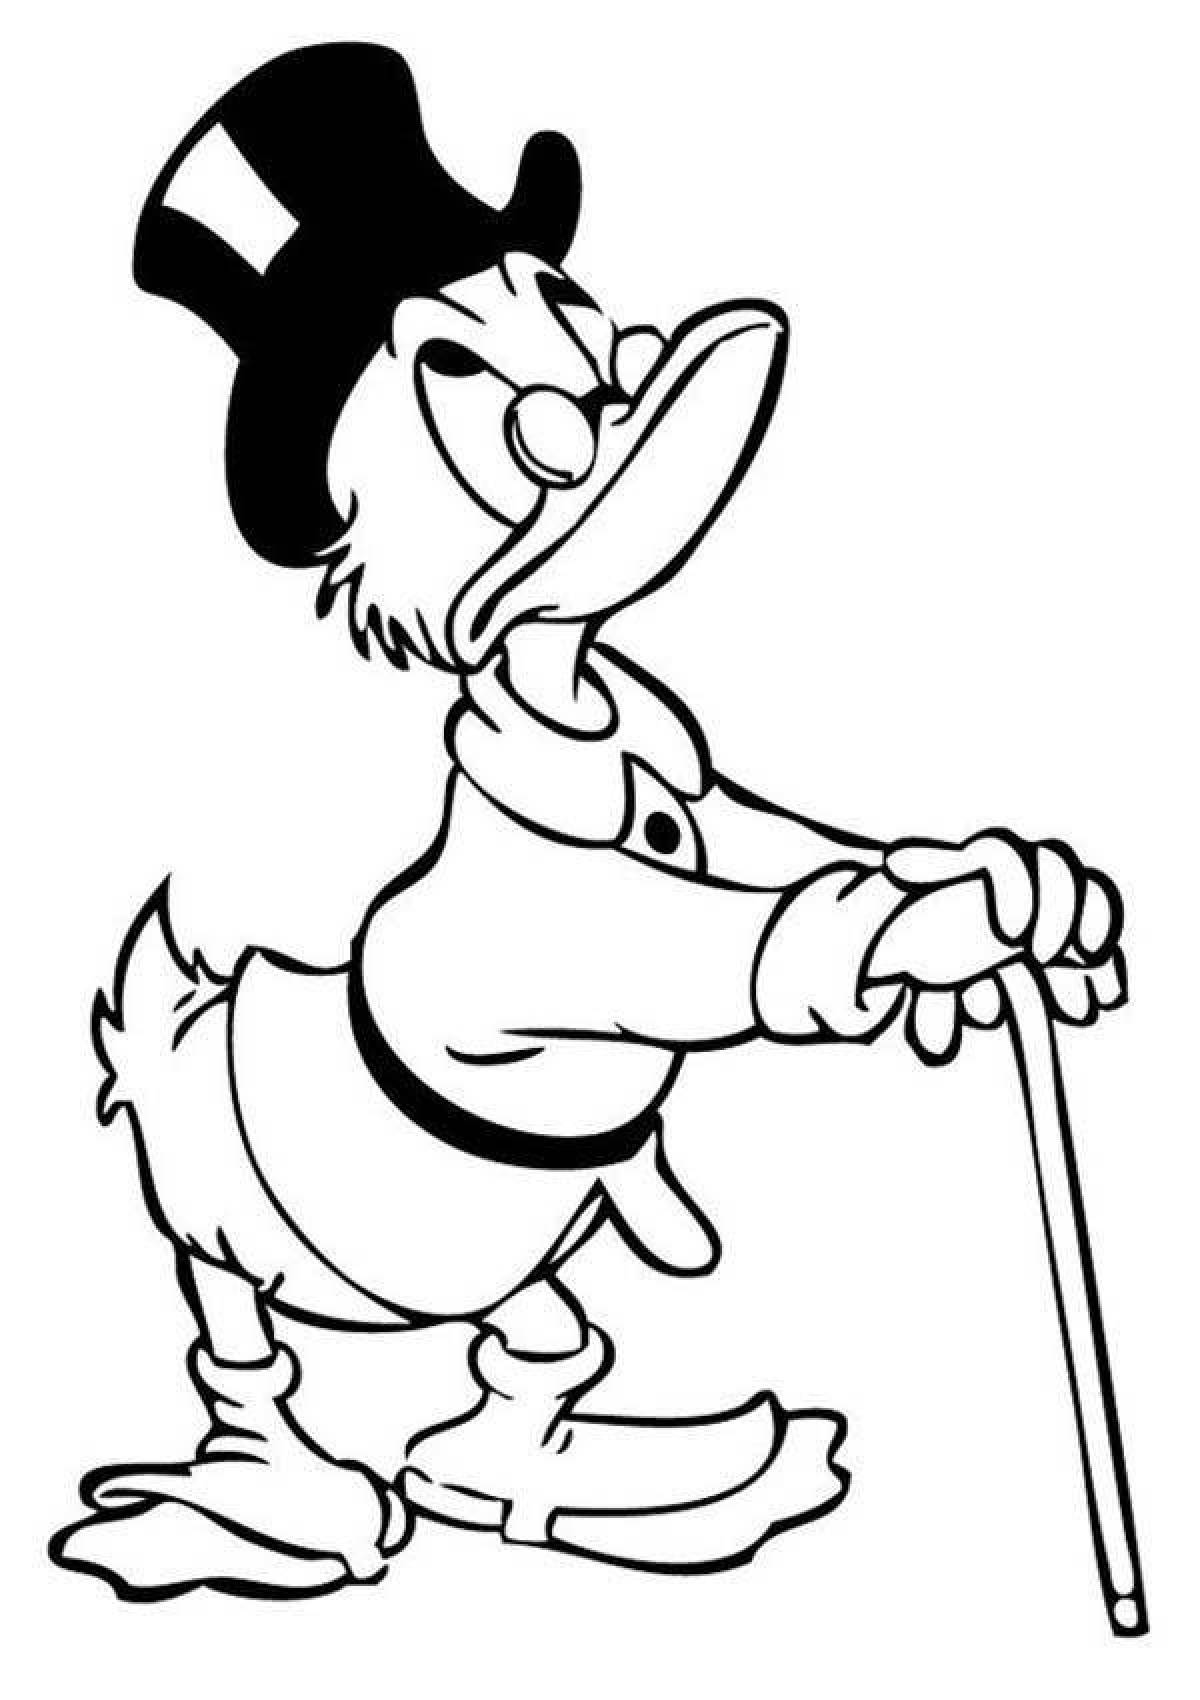 Colorful scrooge coloring page